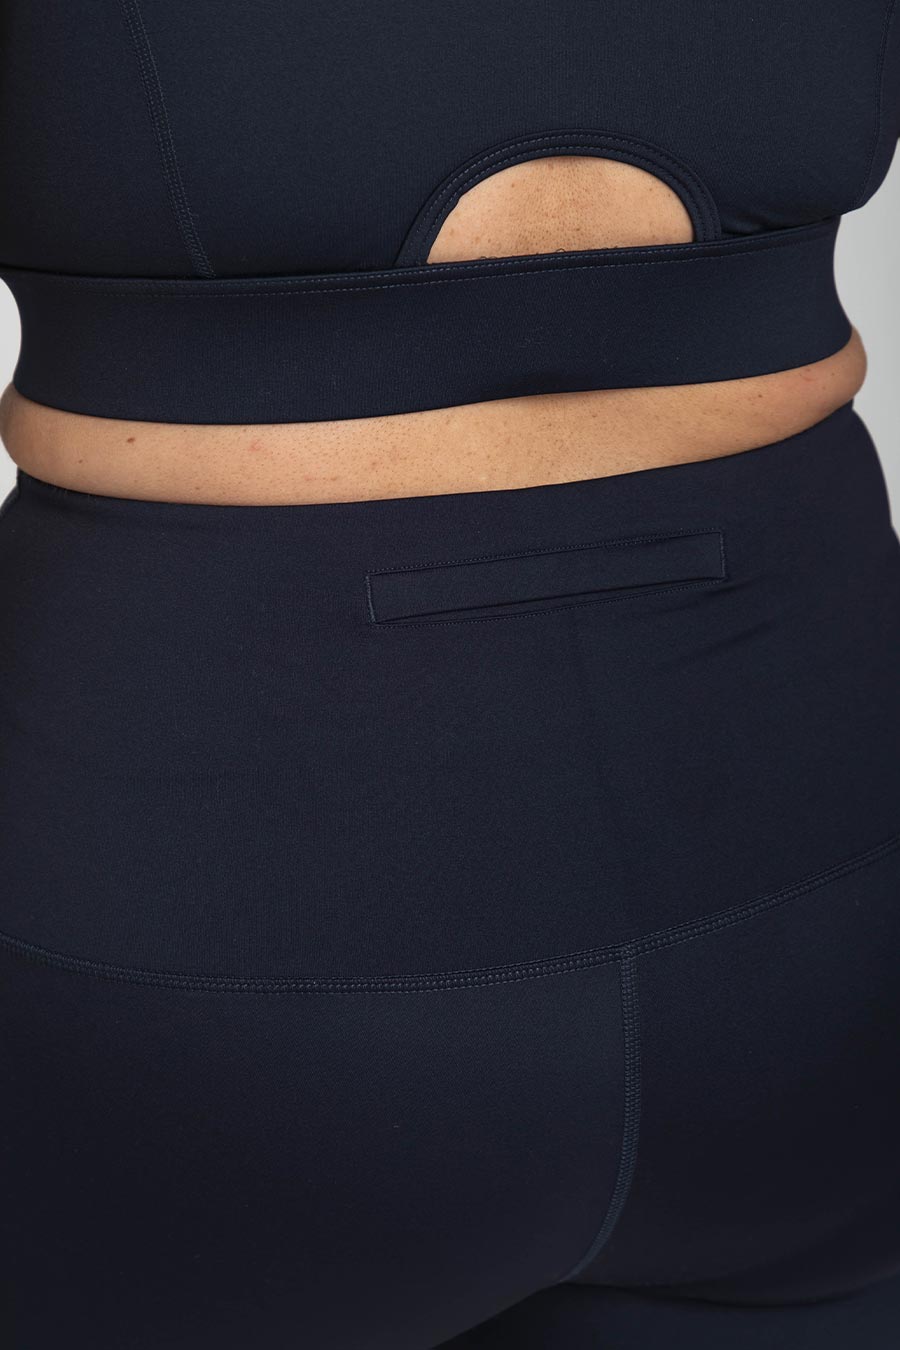 Ultra High Waist 7/8 Length Tight - Midnight Blue from Active Truth™
